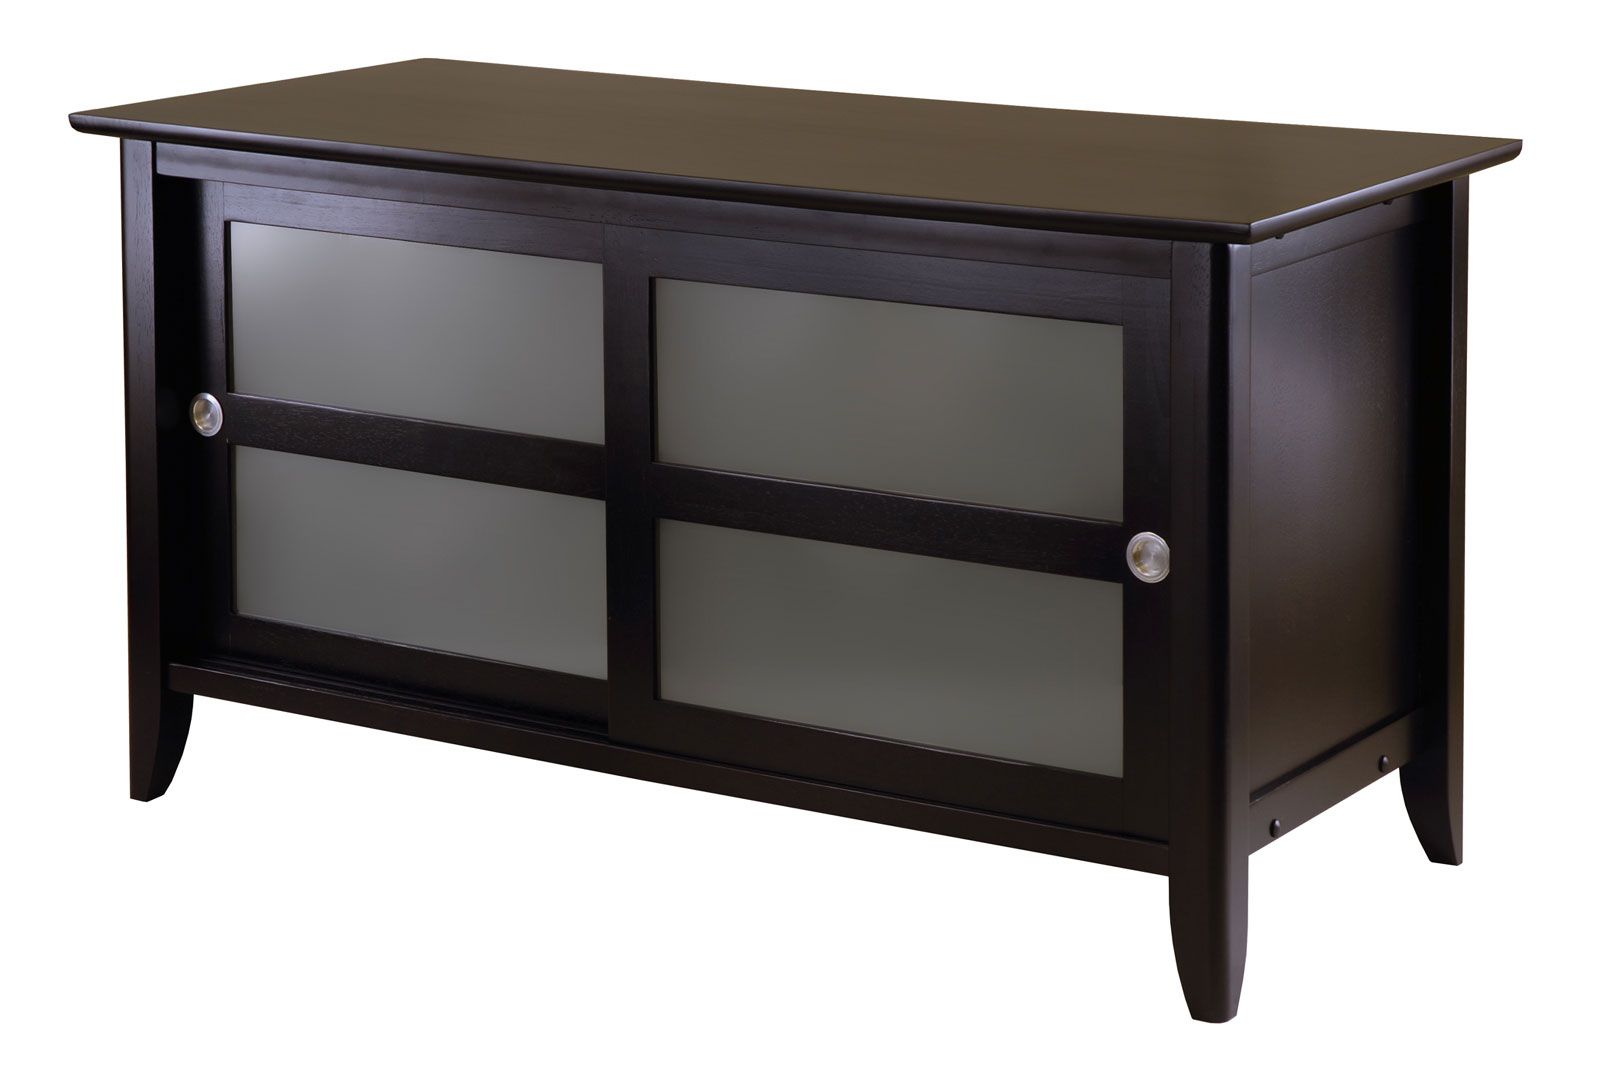 Sliding Frosted Glass Door Tv Stand In Tv Stands In Tv Cabinets With Glass Doors (View 13 of 15)